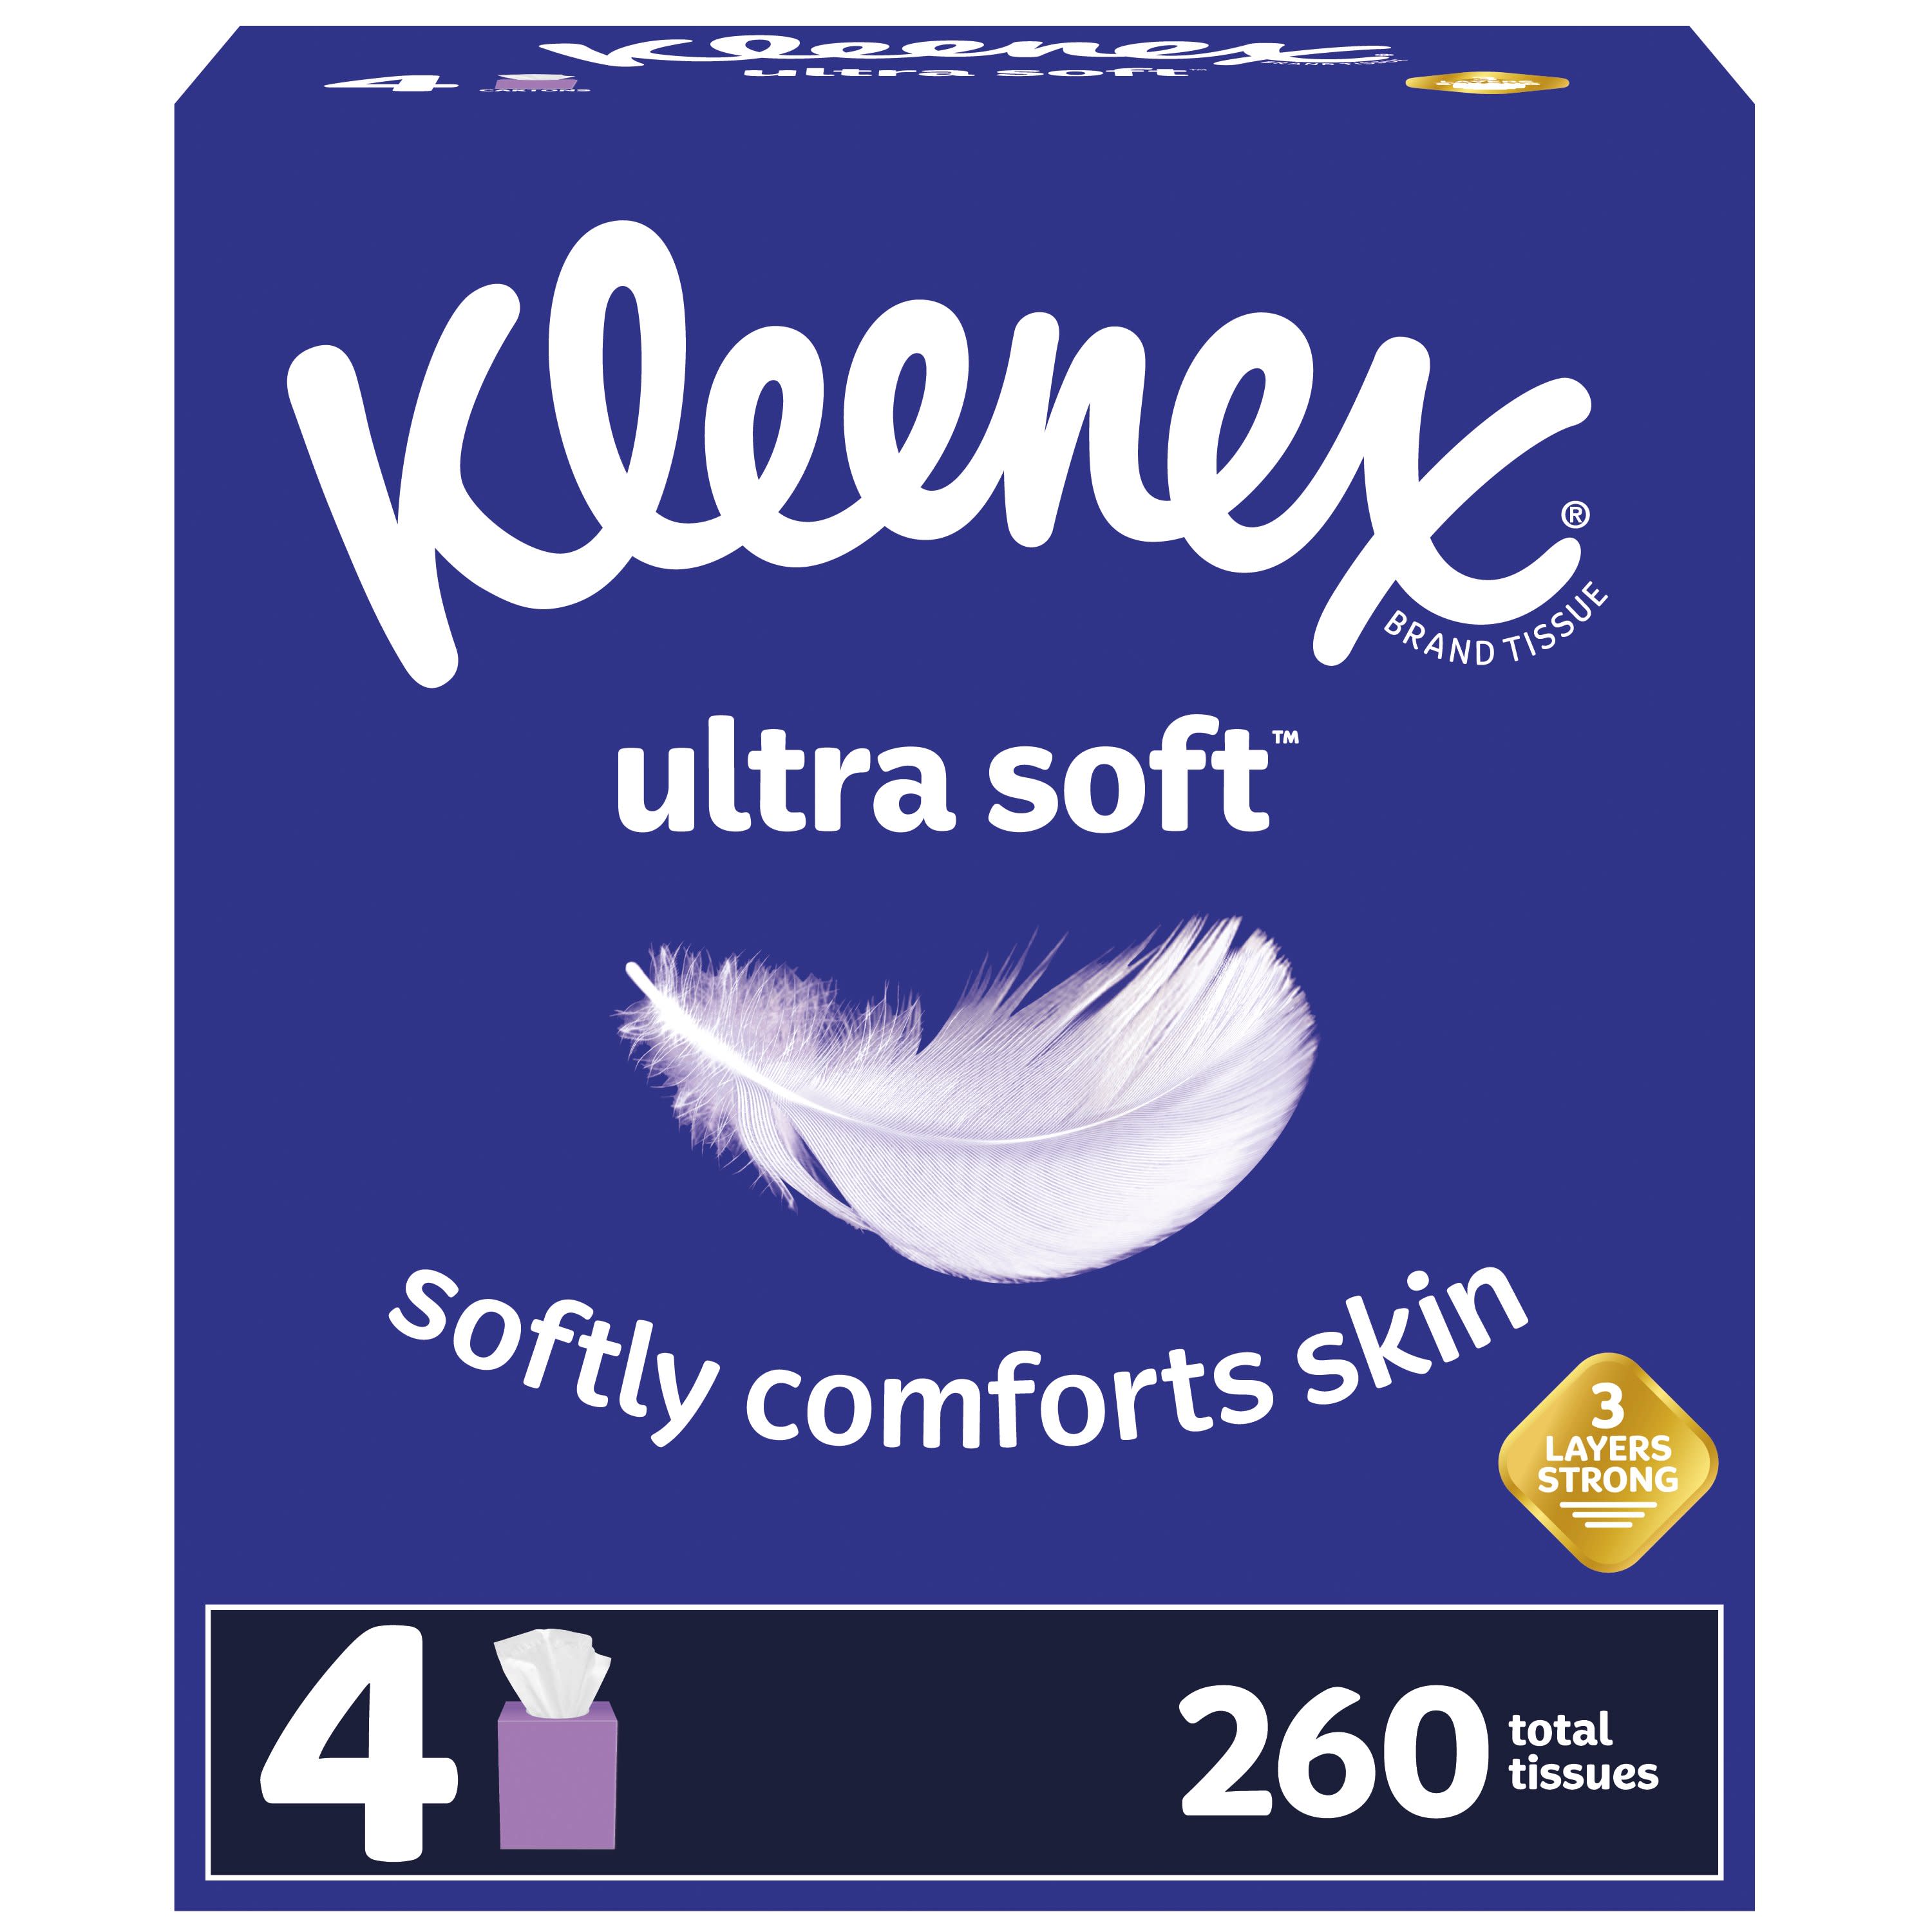 Kleenex Ultra Soft Facial Tissues, 4 Cube Boxes, 65 White Tissues per Box, 3-Ply (260 Total) - image 3 of 11